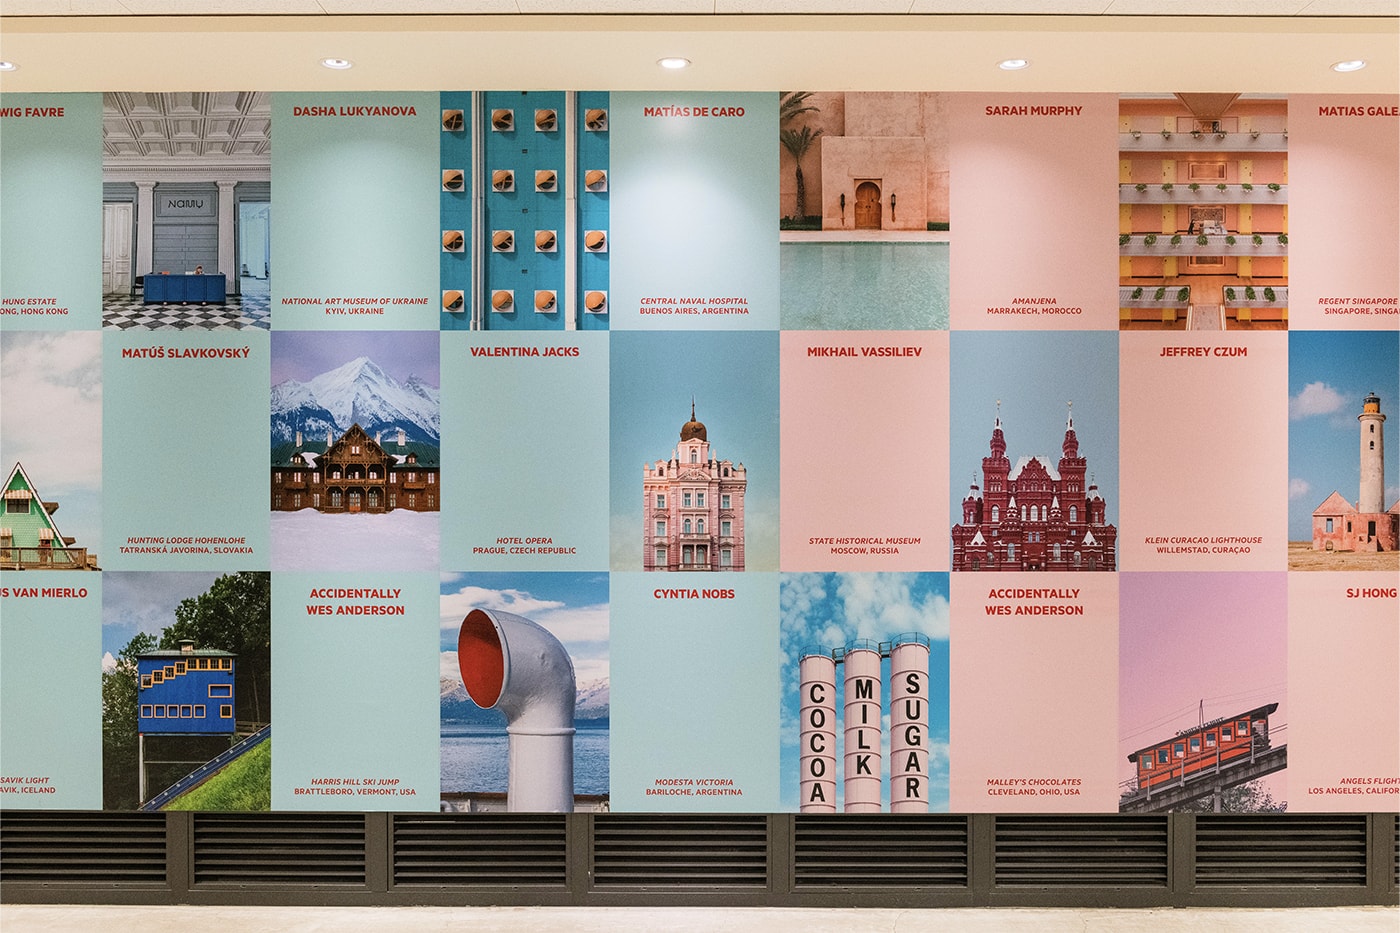 Wes Anderson's 10 Most Recognizable Trademarks